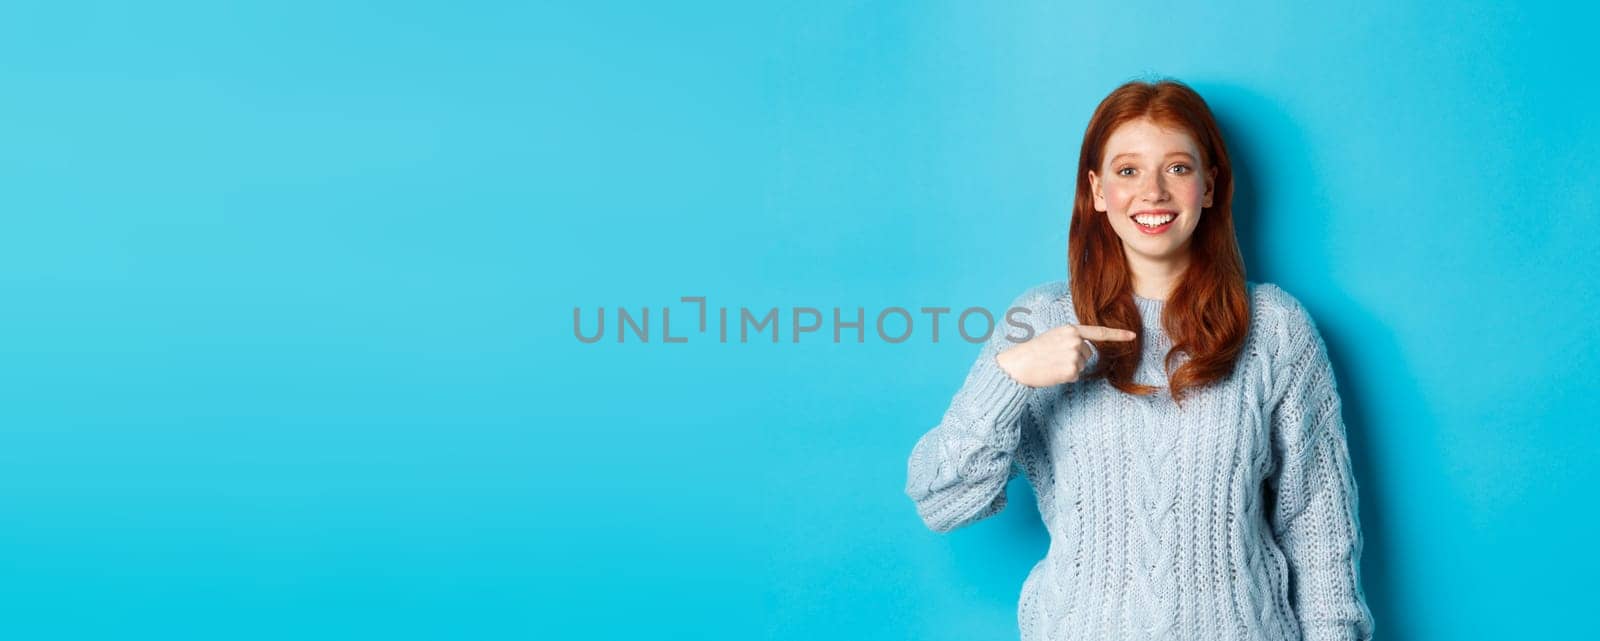 Beautiful redhead girl pointing at herself and smiling happy, being chosen, standing in sweater against blue background.